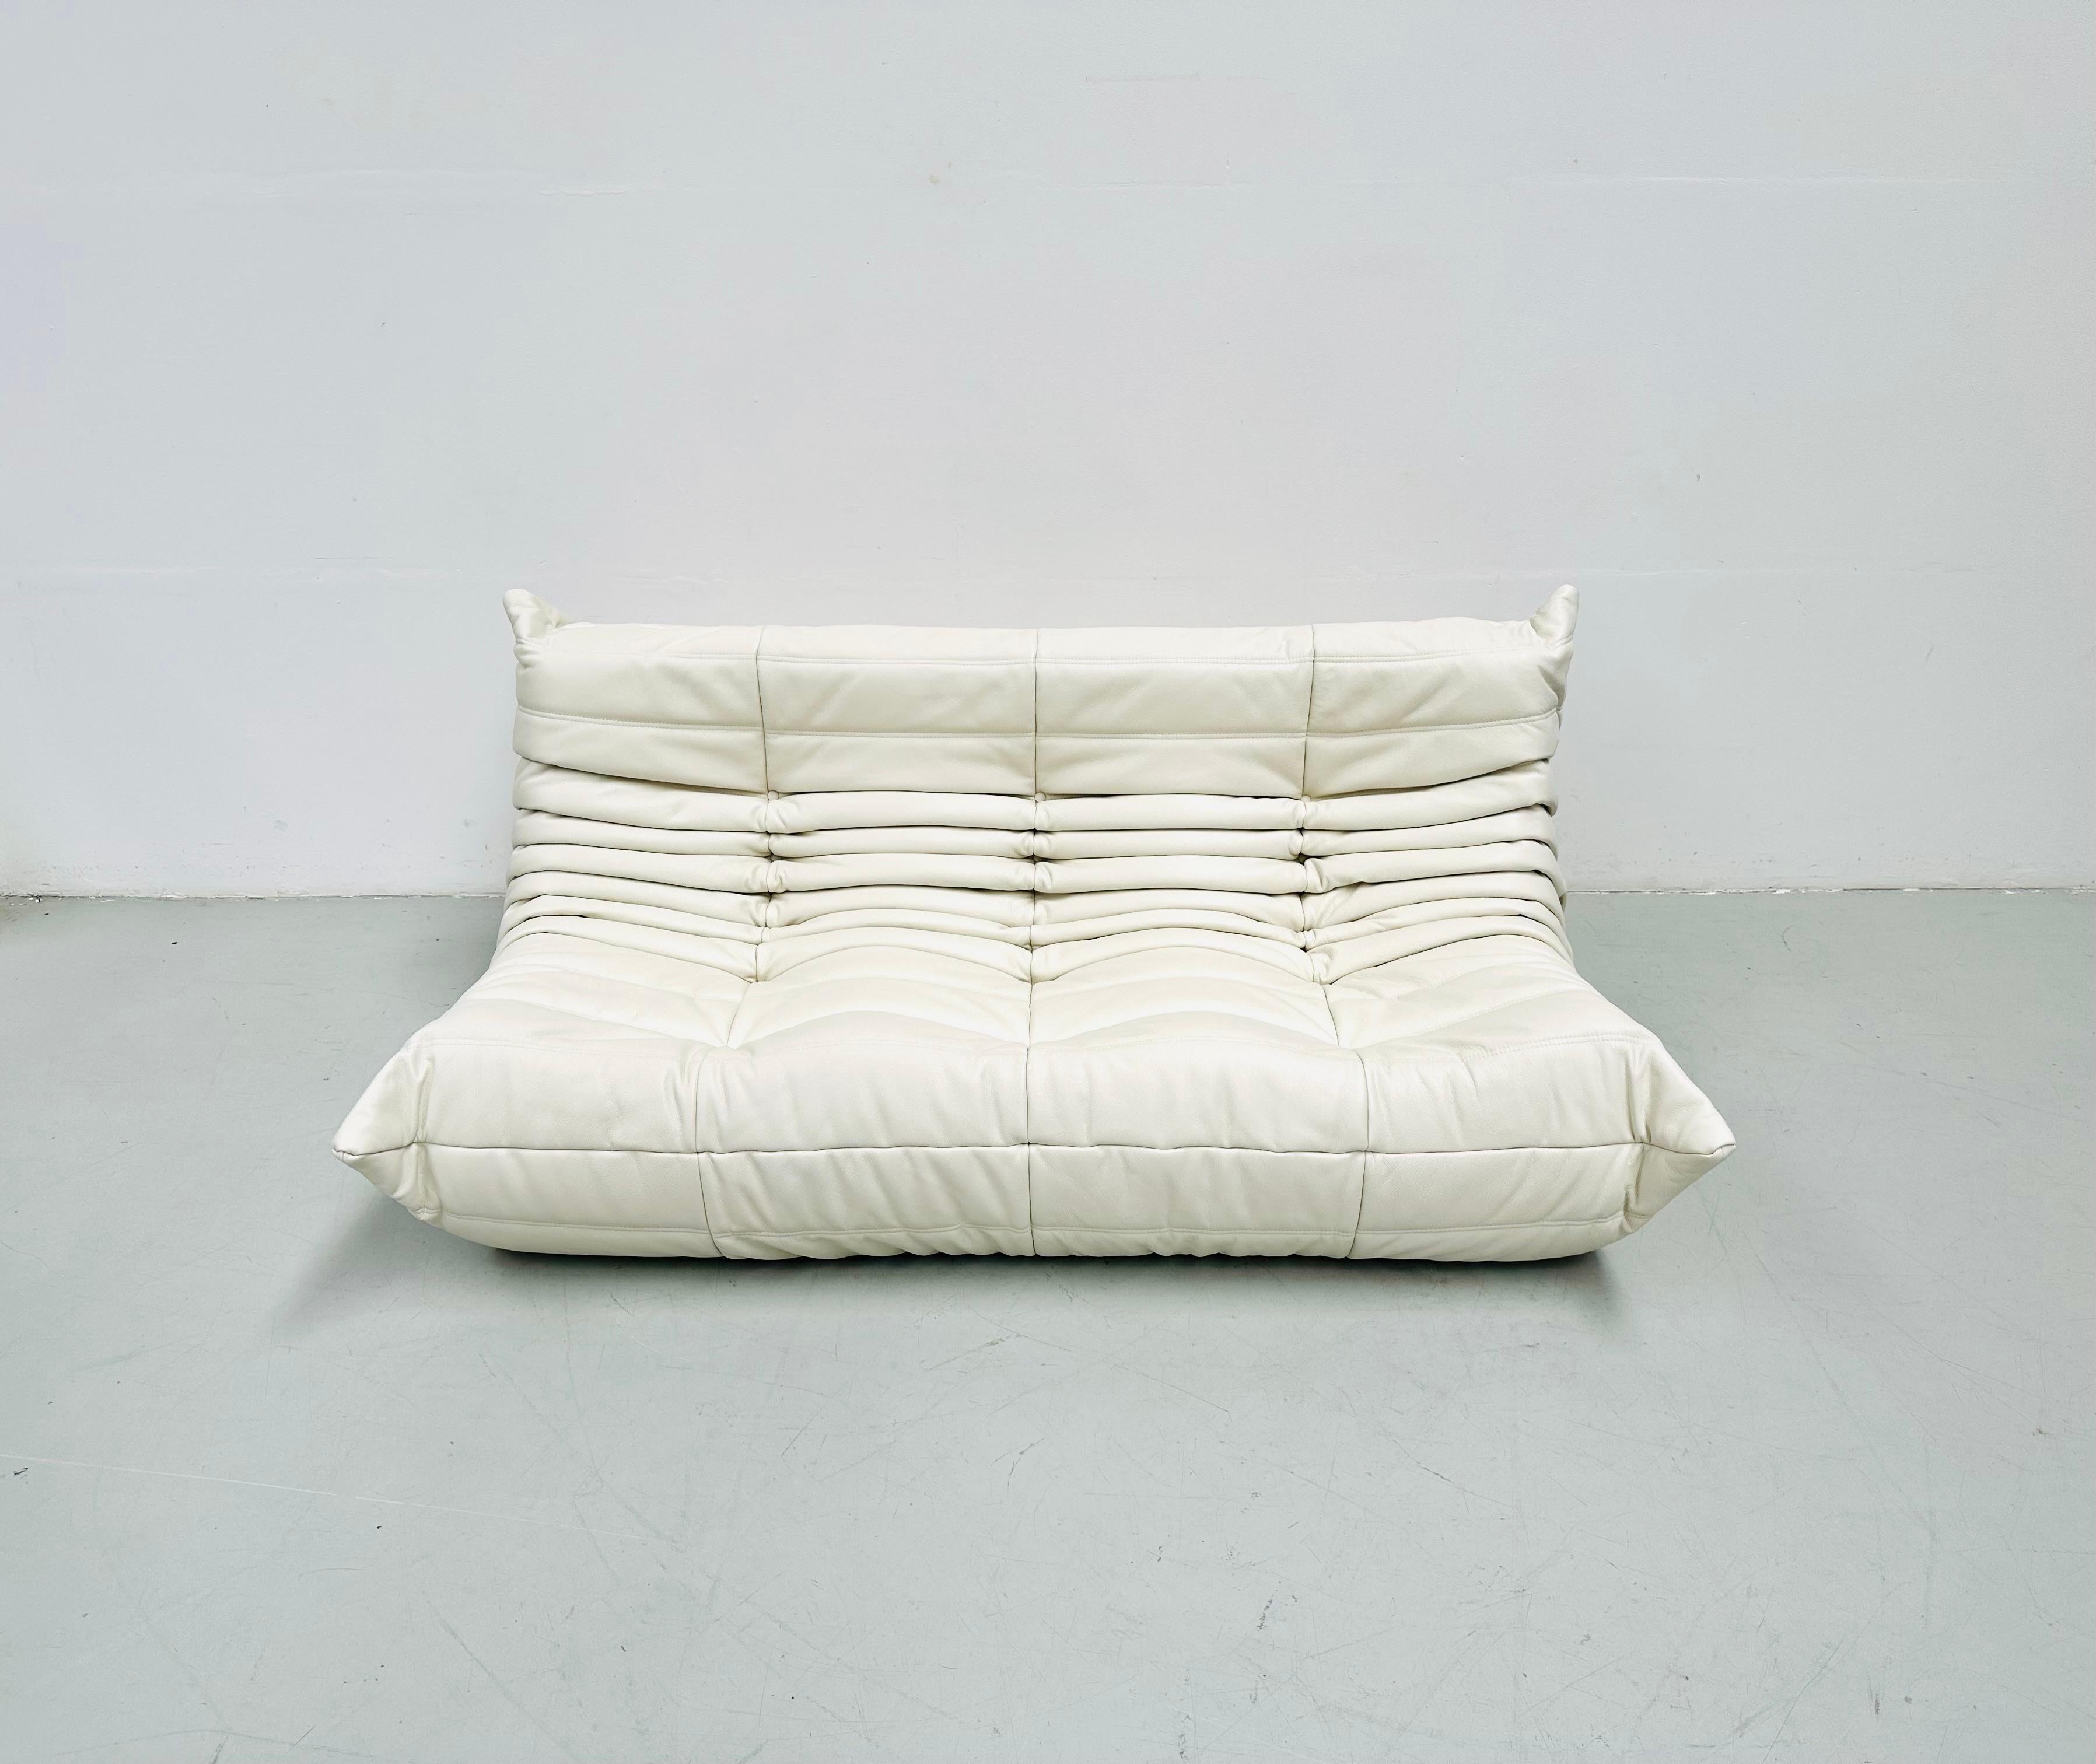 French Togo Sofa in White Leather by Michel Ducaroy for Ligne Roset. 2